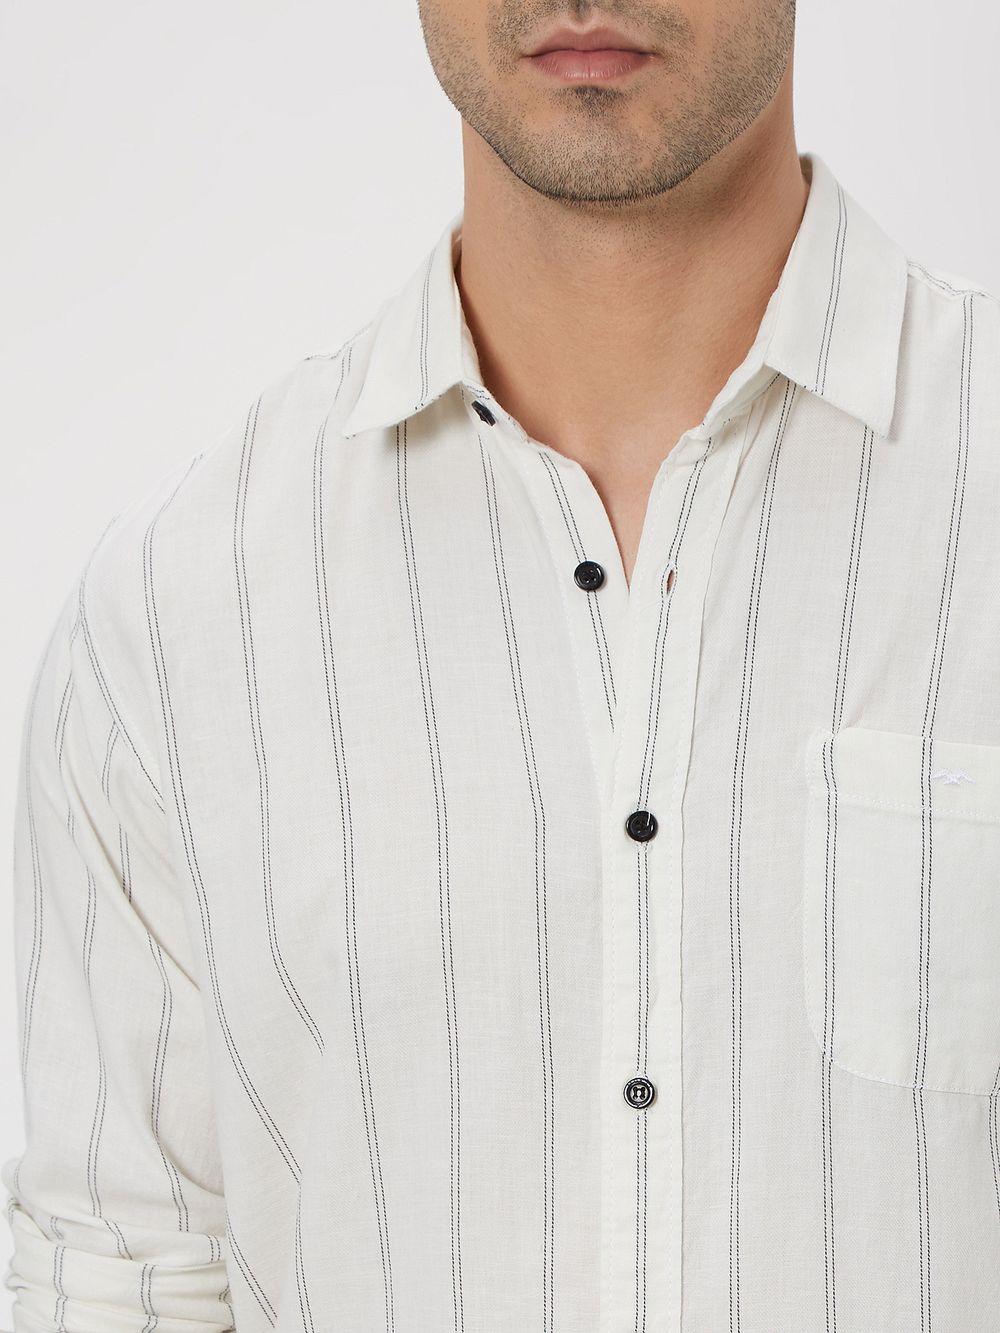 Off White Pin Stripe Slim Fit Casual Shirt